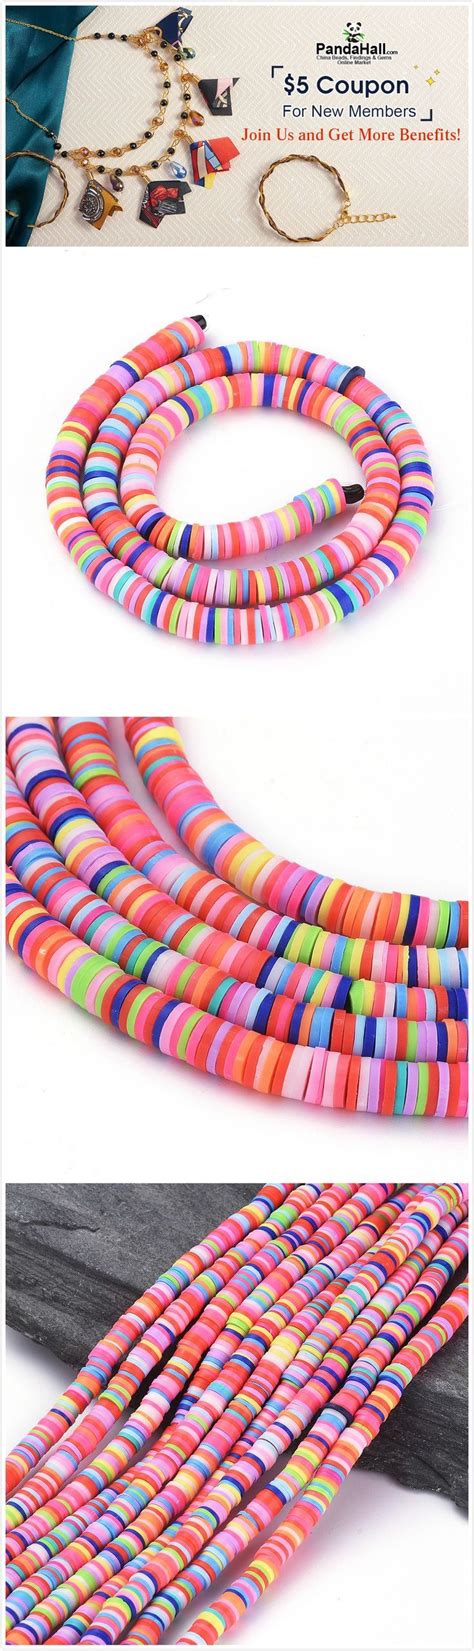 Wholesale Flat Round Eco Friendly Handmade Polymer Clay Beads Clay